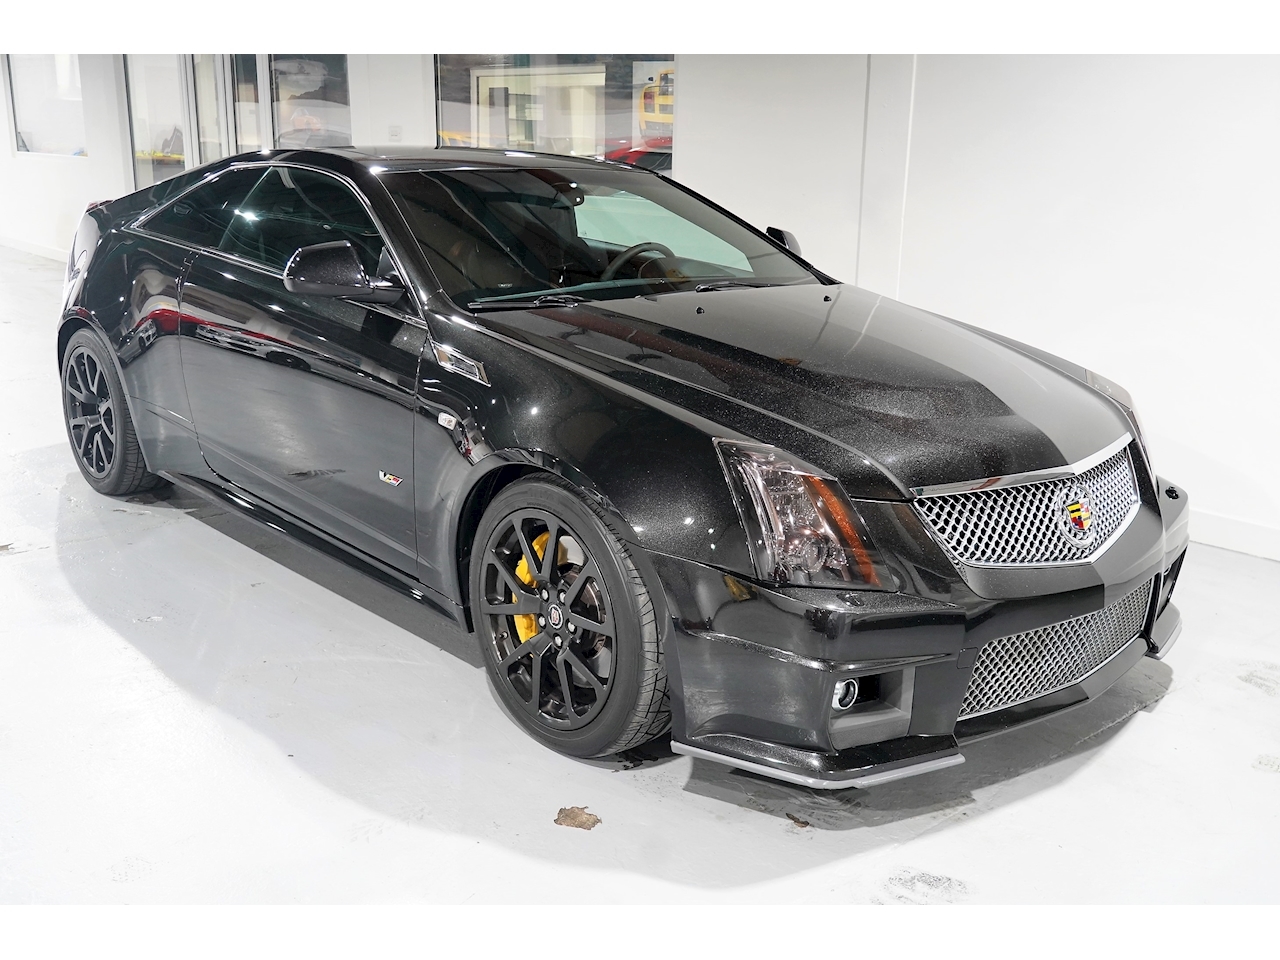 2011 Cadillac CTS-V 6.2 V8 Coupe - Diamond Edition - Supercharged LSA - Left Hand Drive